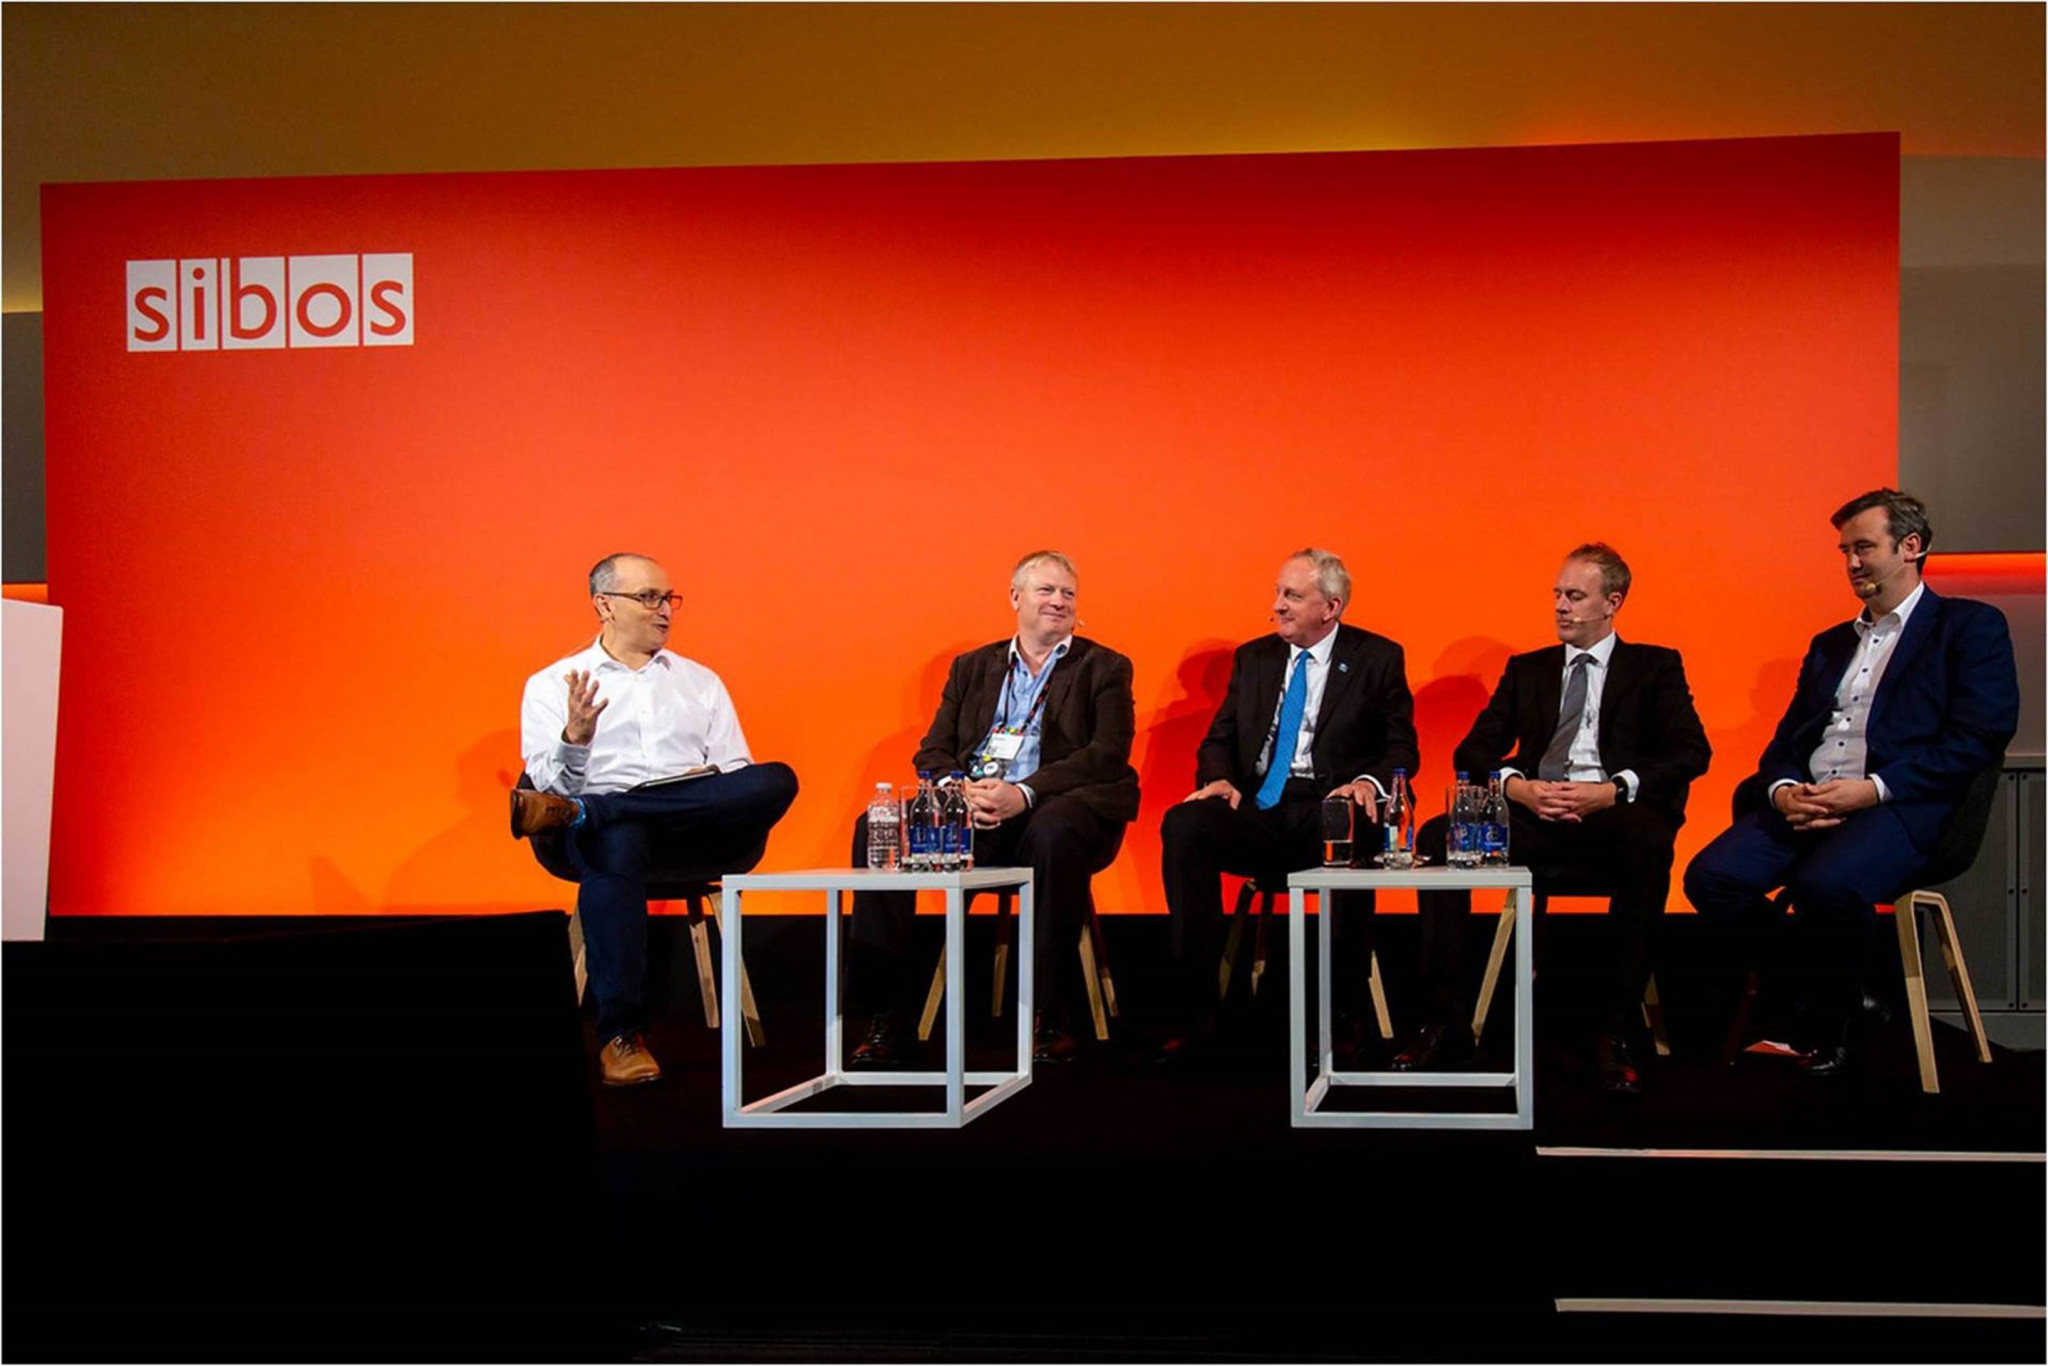 Apis Partners and Swift held “The SIBOS Global Leaders Event” in London